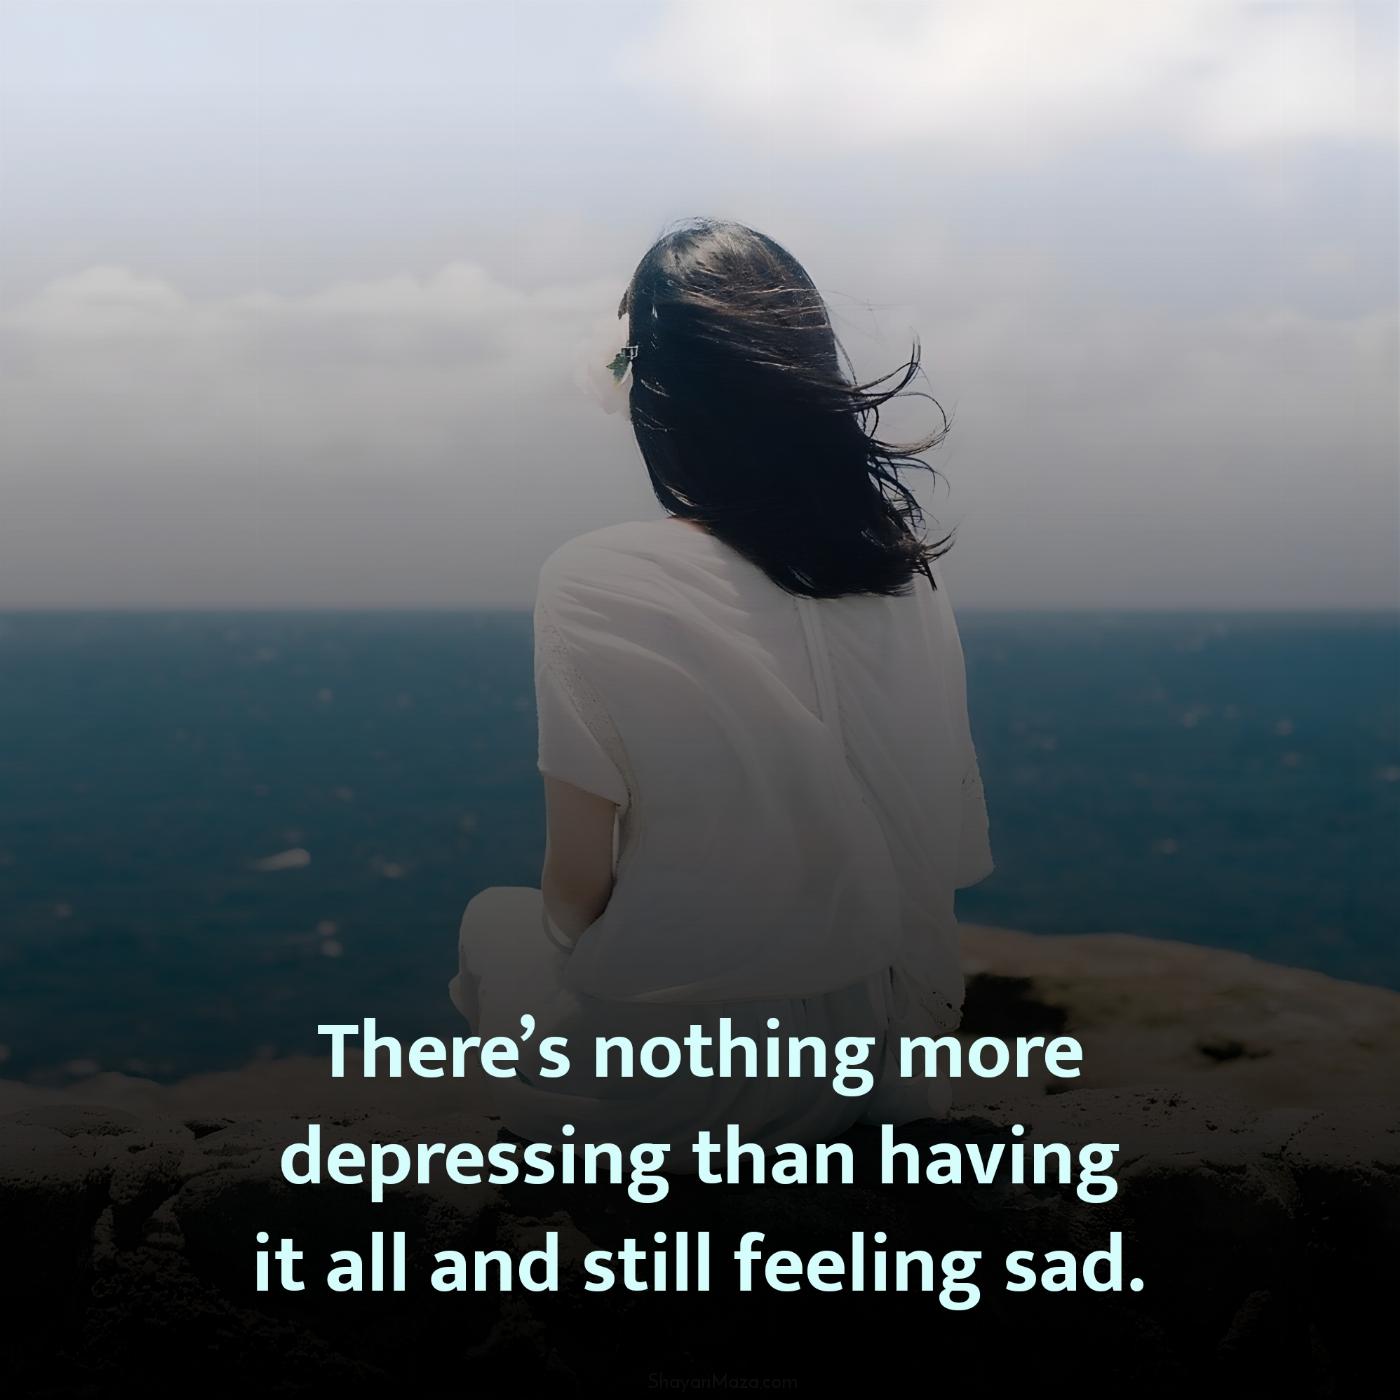 Theres nothing more depressing than having it all